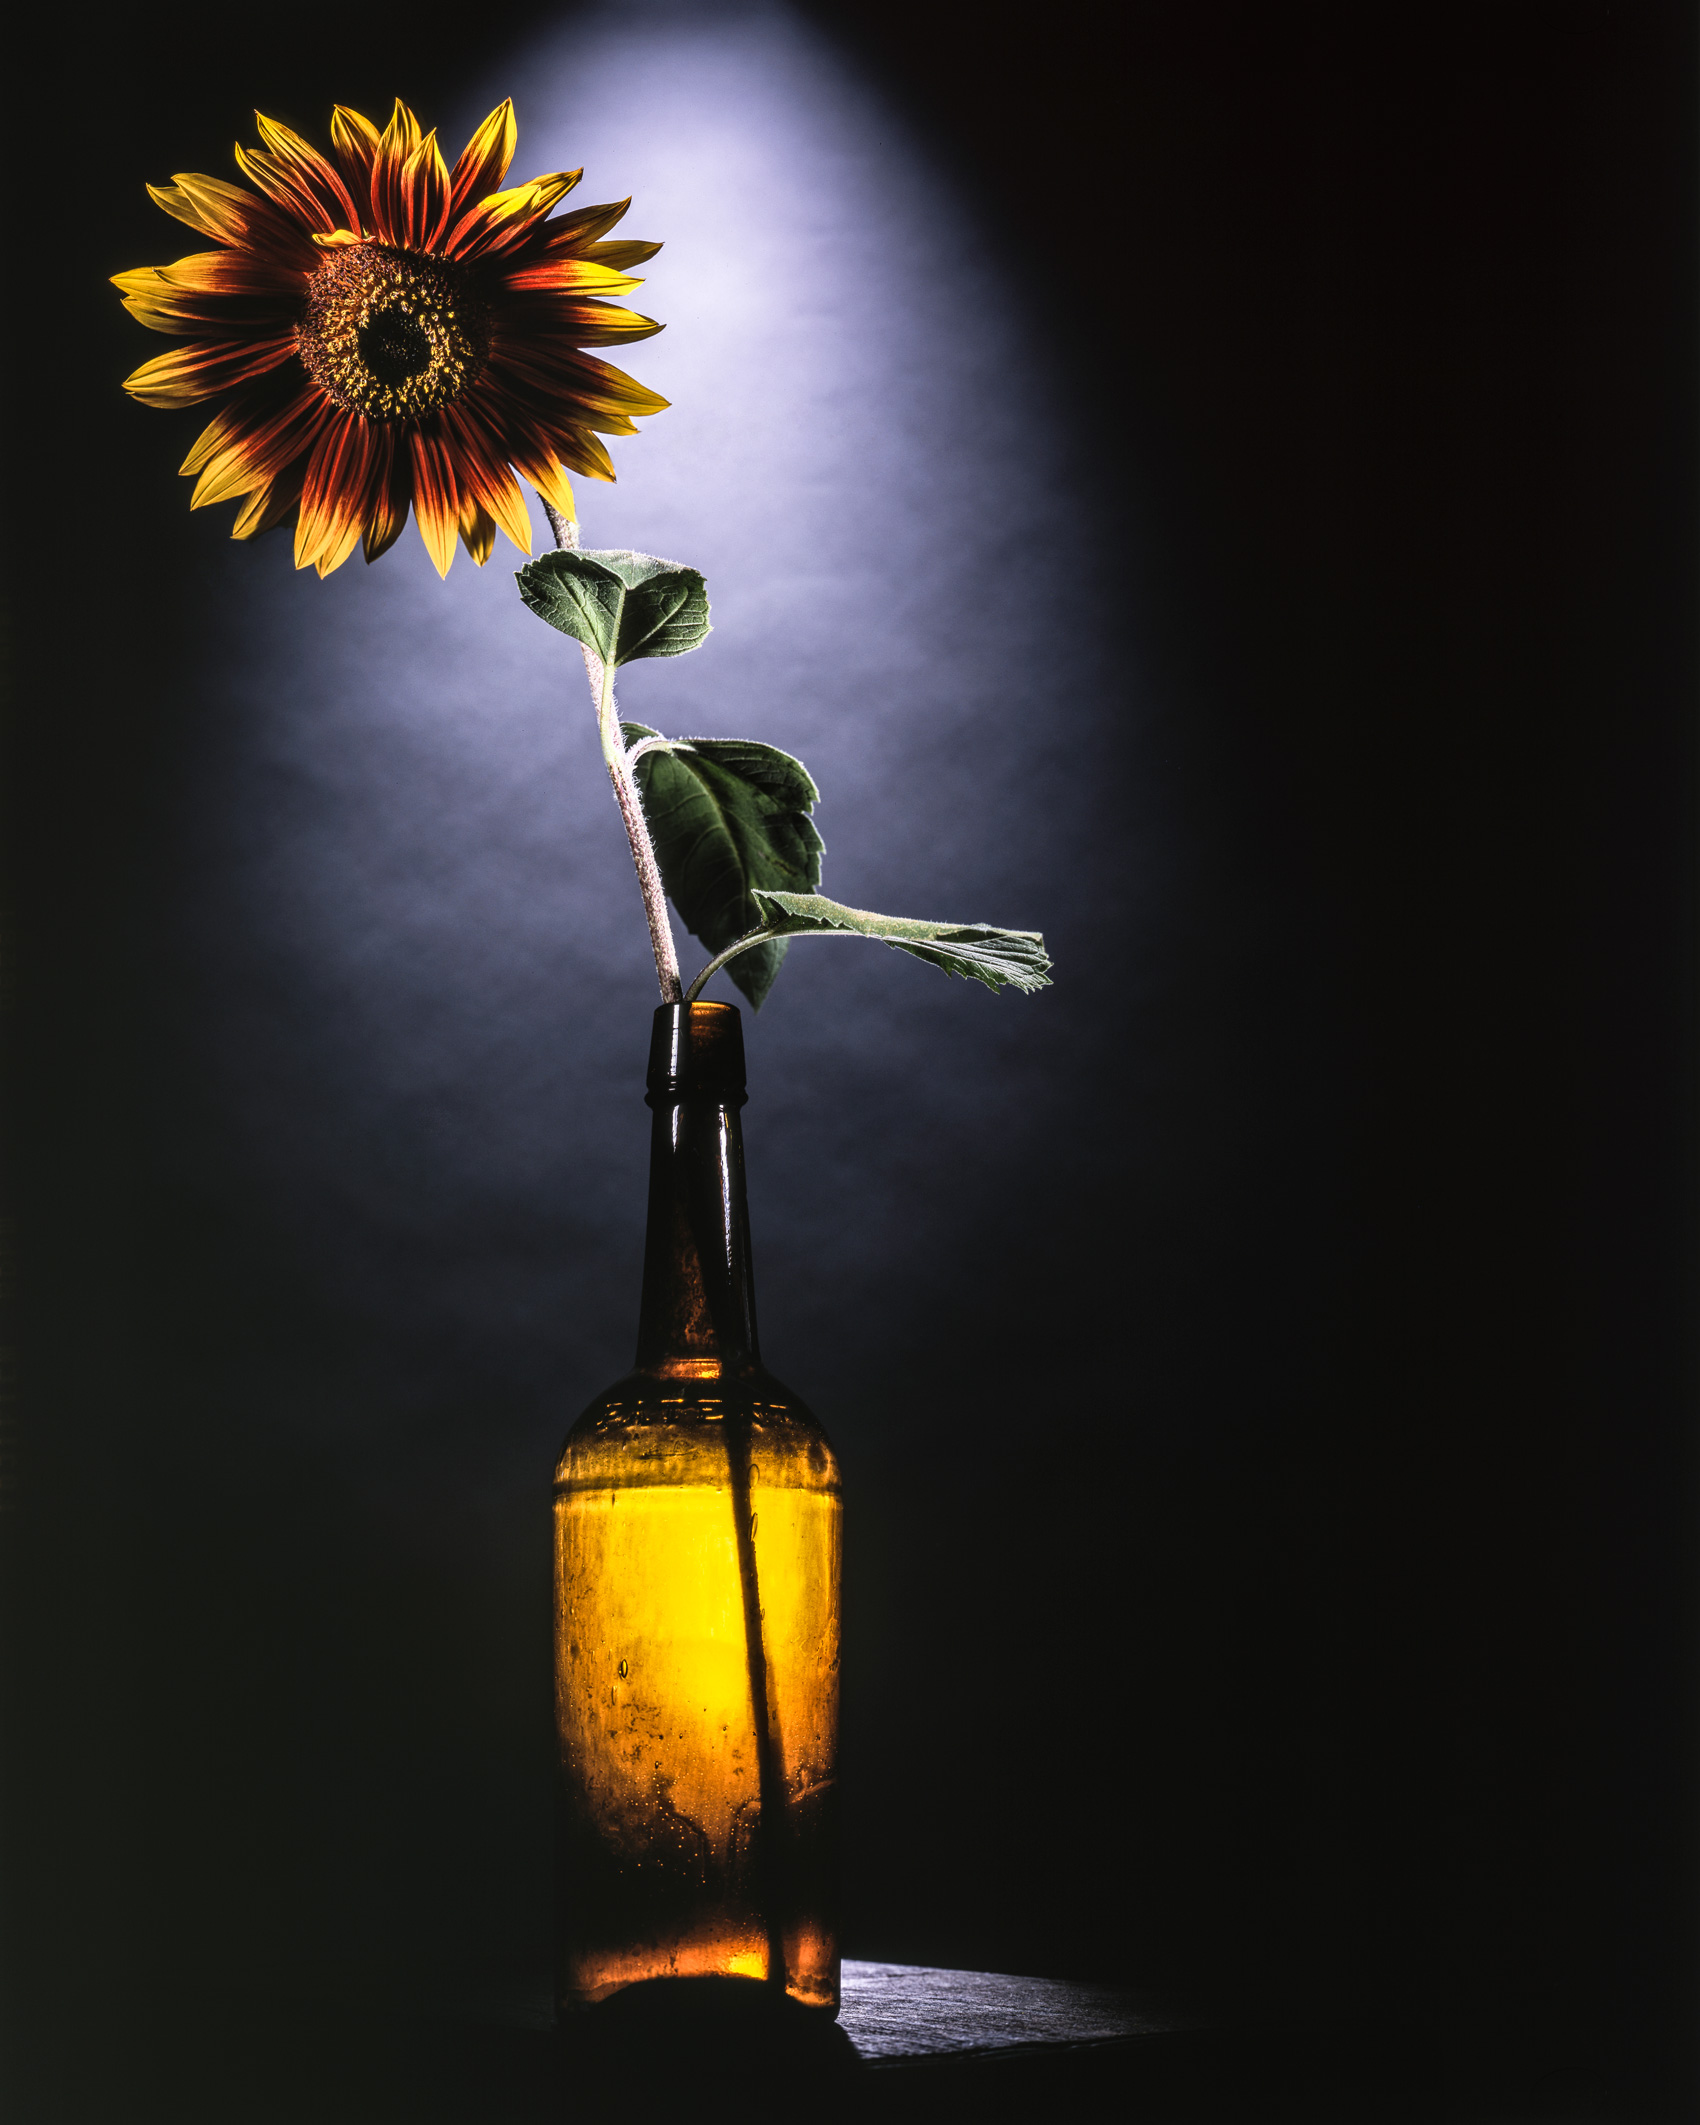 Red Sunflower in a Bottle